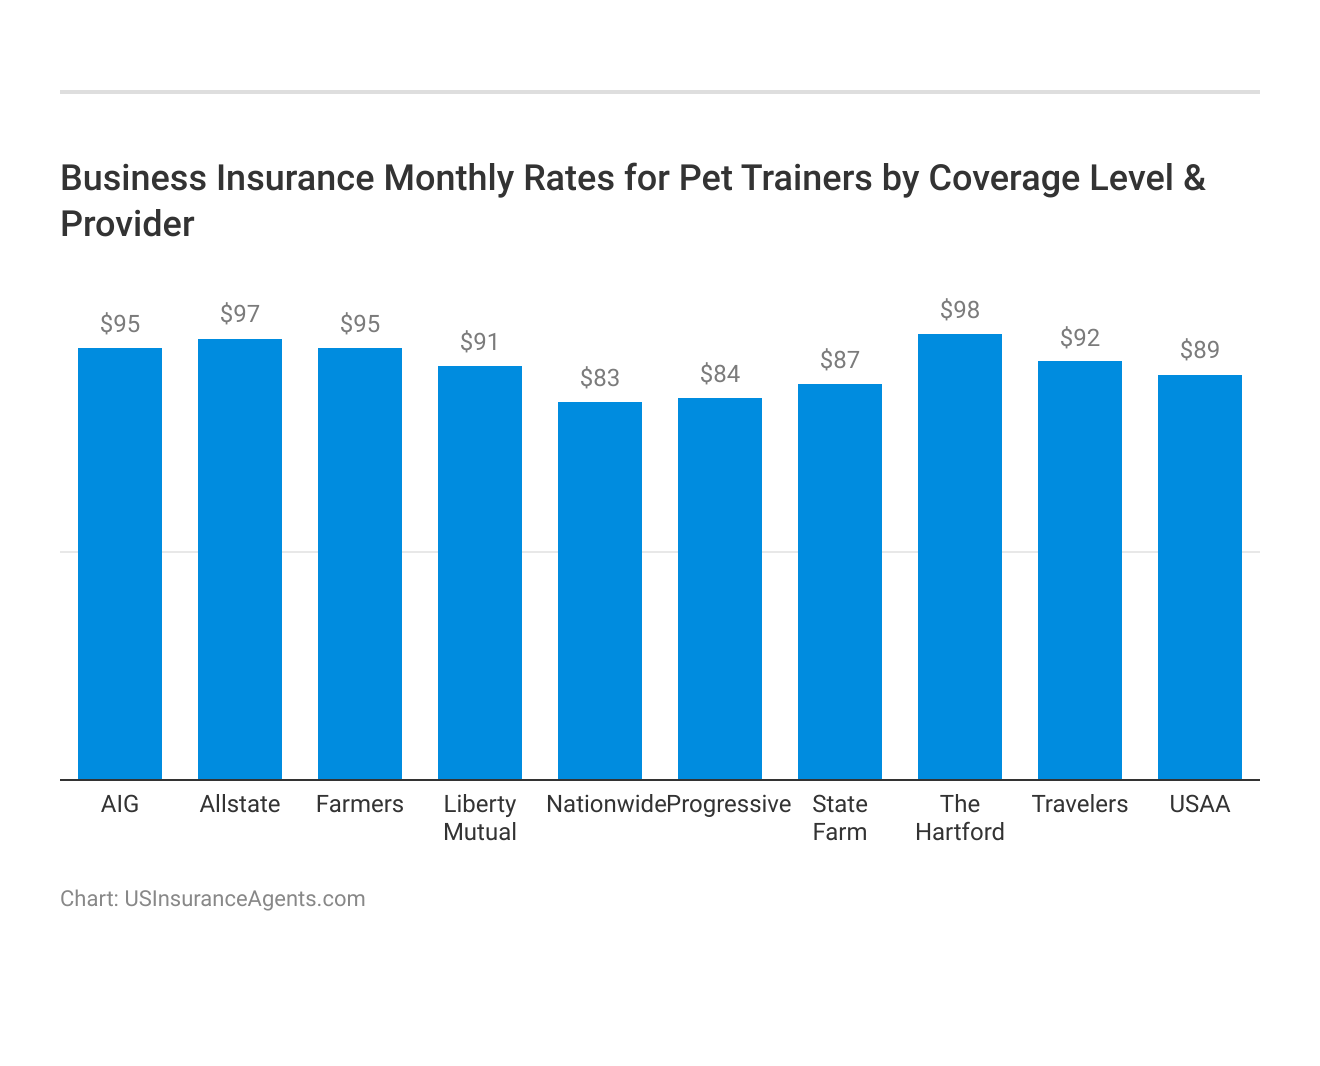 <h3>Business Insurance Monthly Rates for Pet Trainers by Coverage Level & Provider</h3>